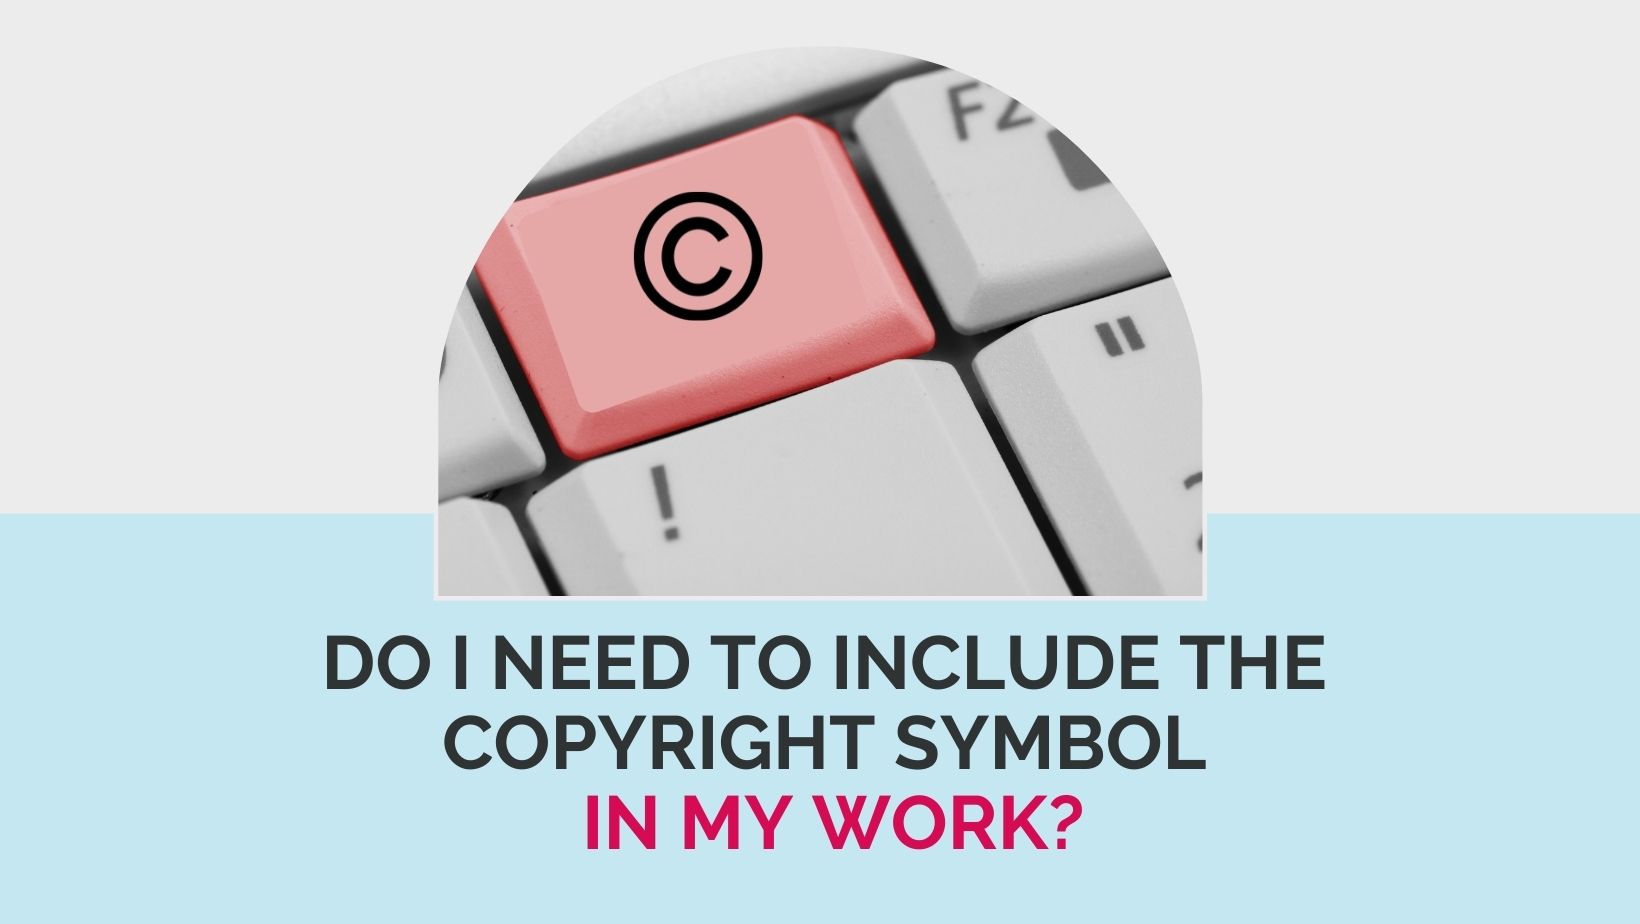 Do I need to include the copyright symbol in my work?